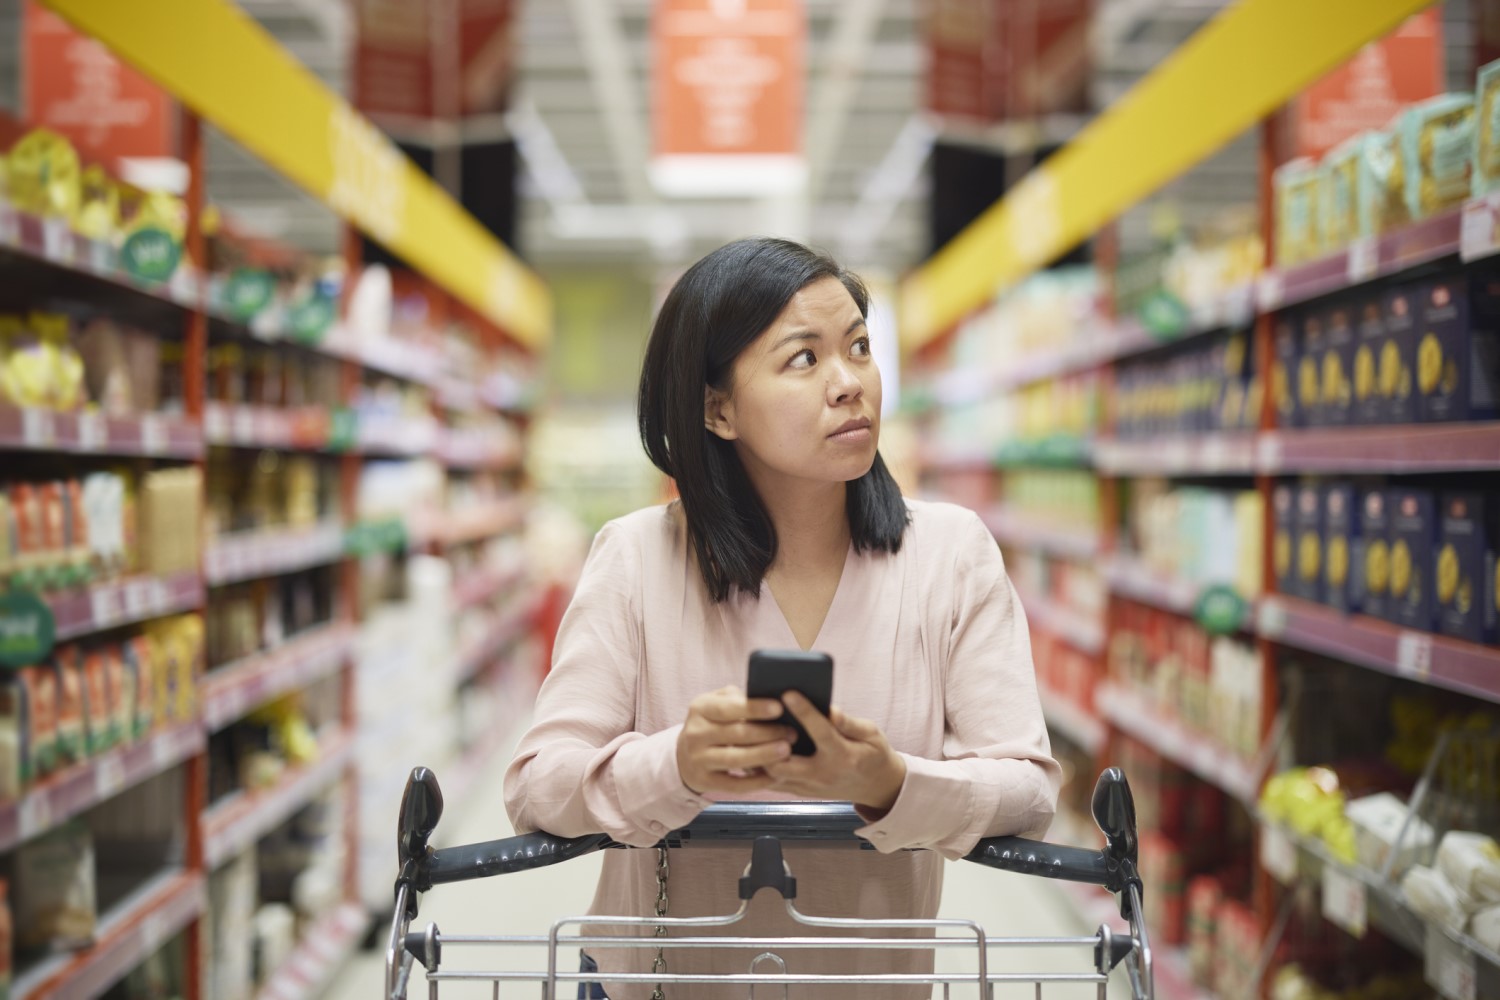 A shopper scans prices while grocery shopping.